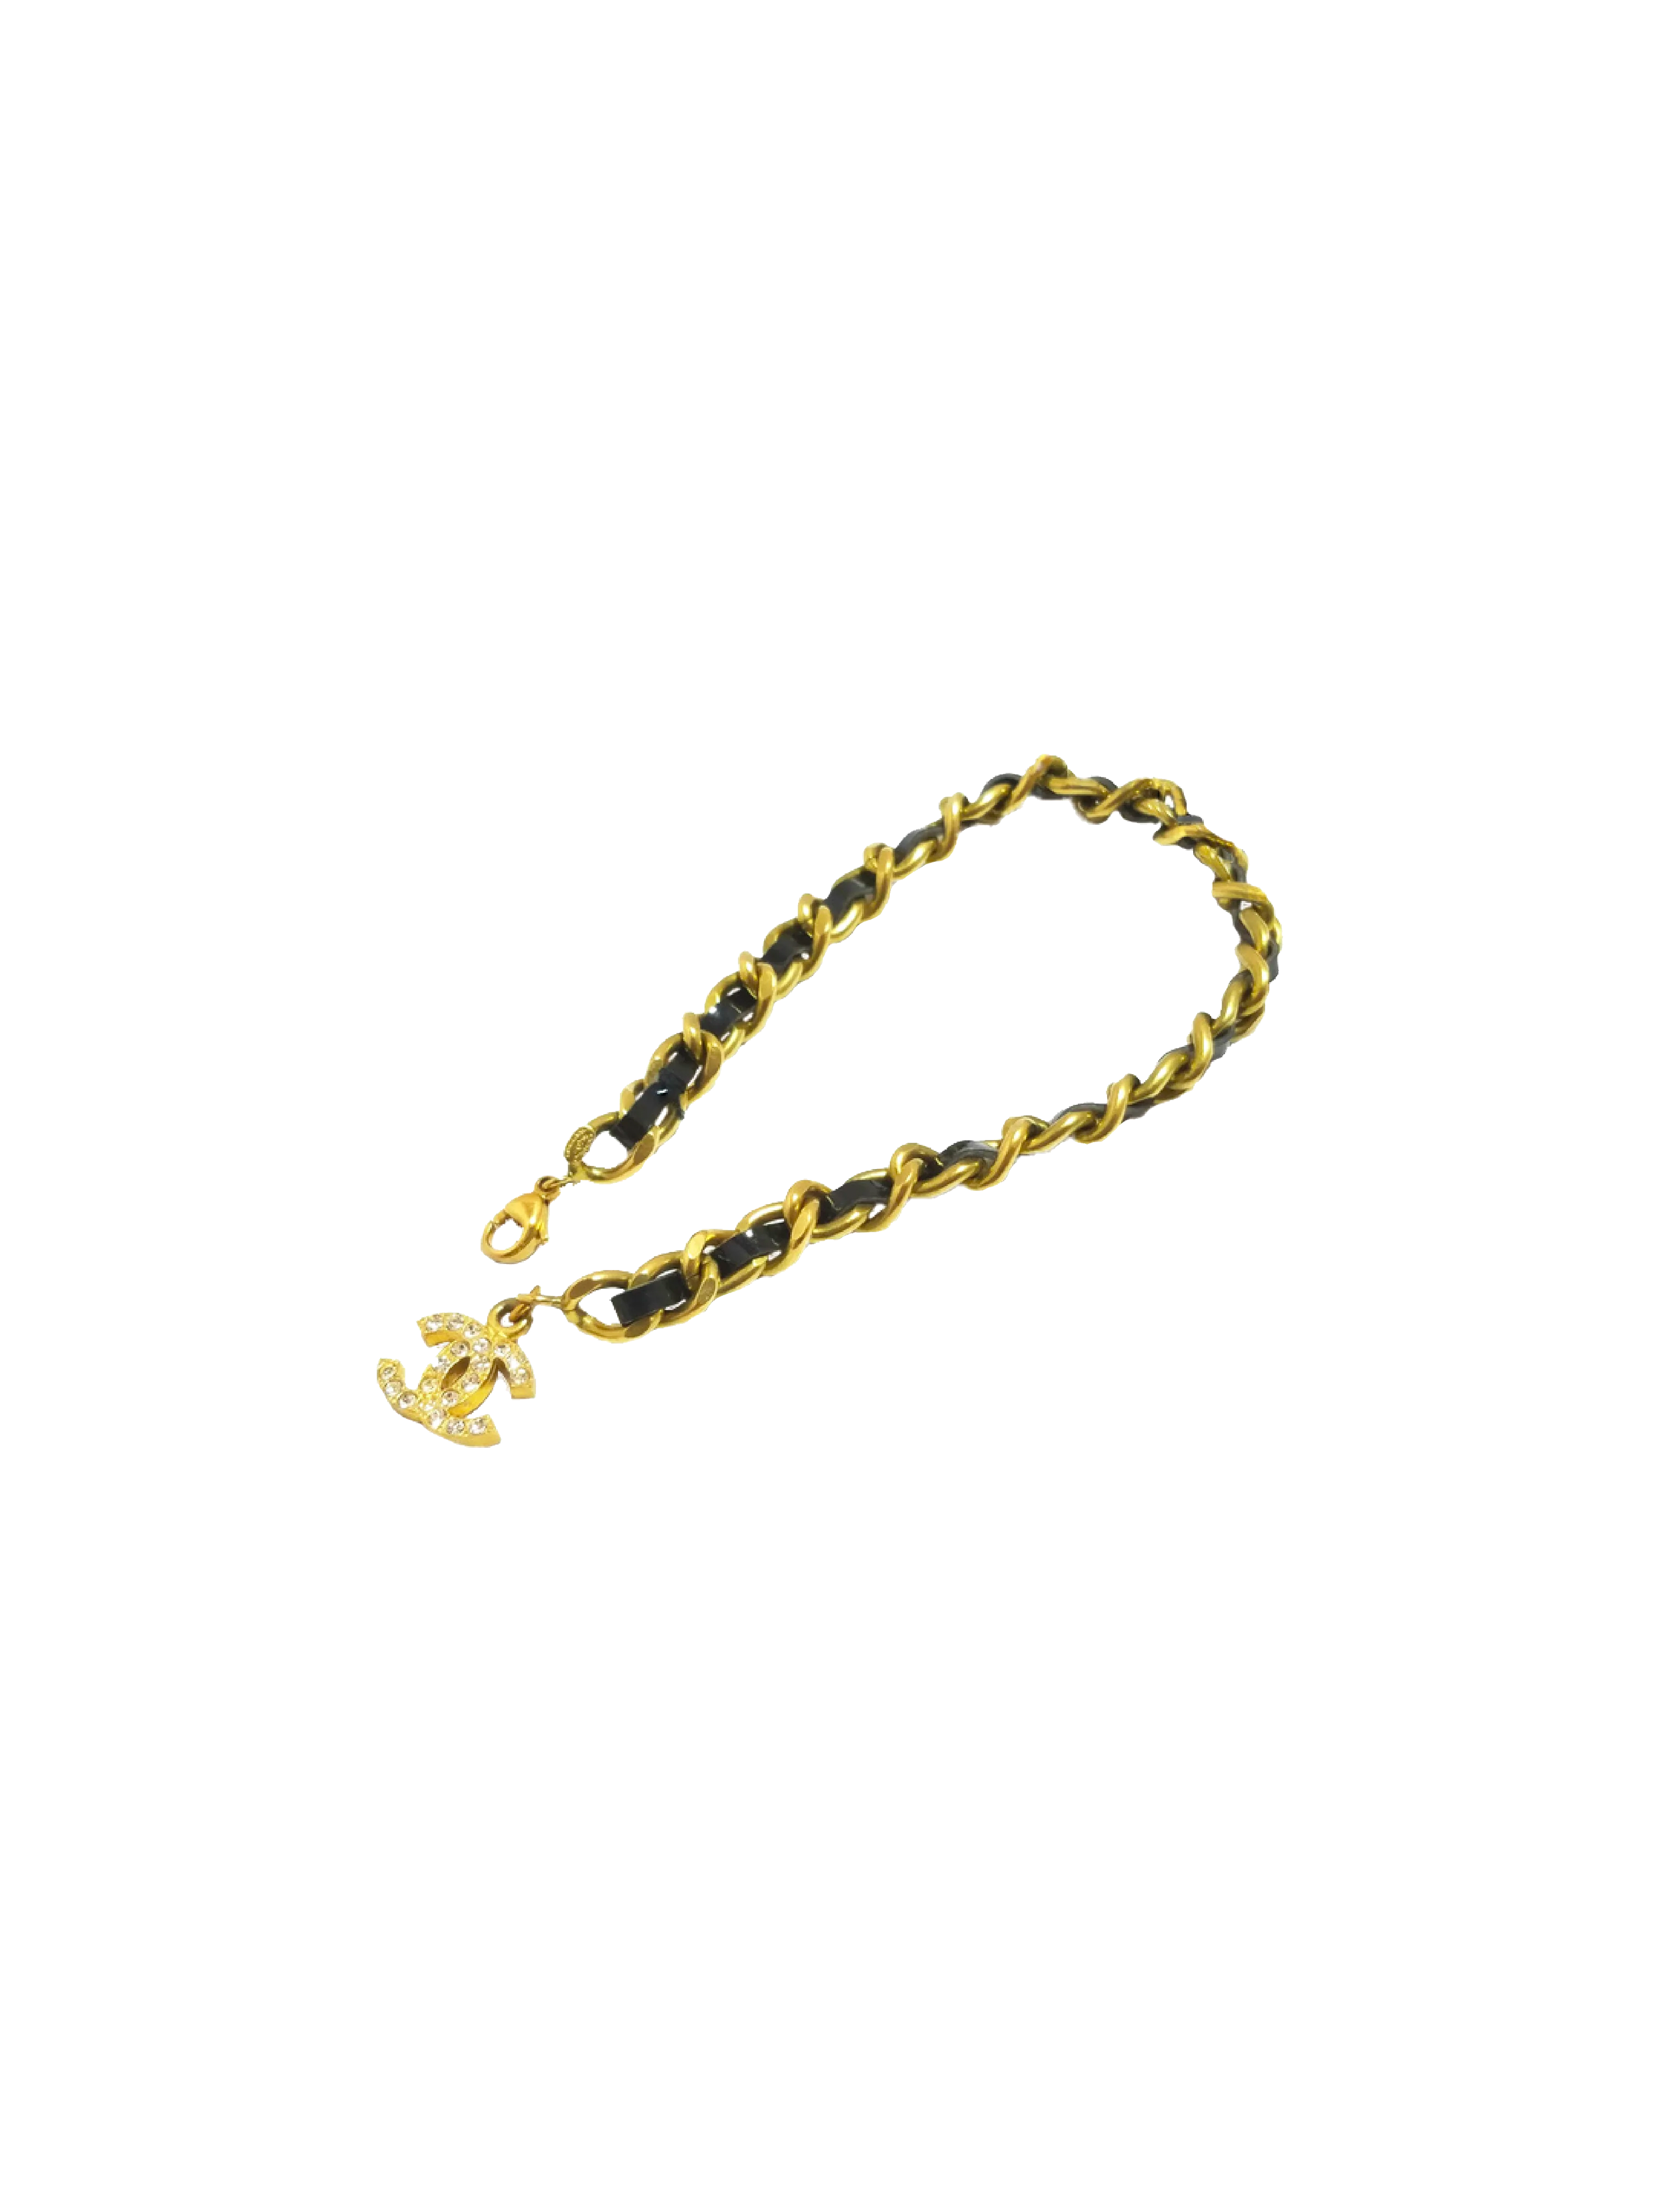 Chanel SS 1995 Rare Leather-Woven Gilt Chain Cuff Bracelets · INTO